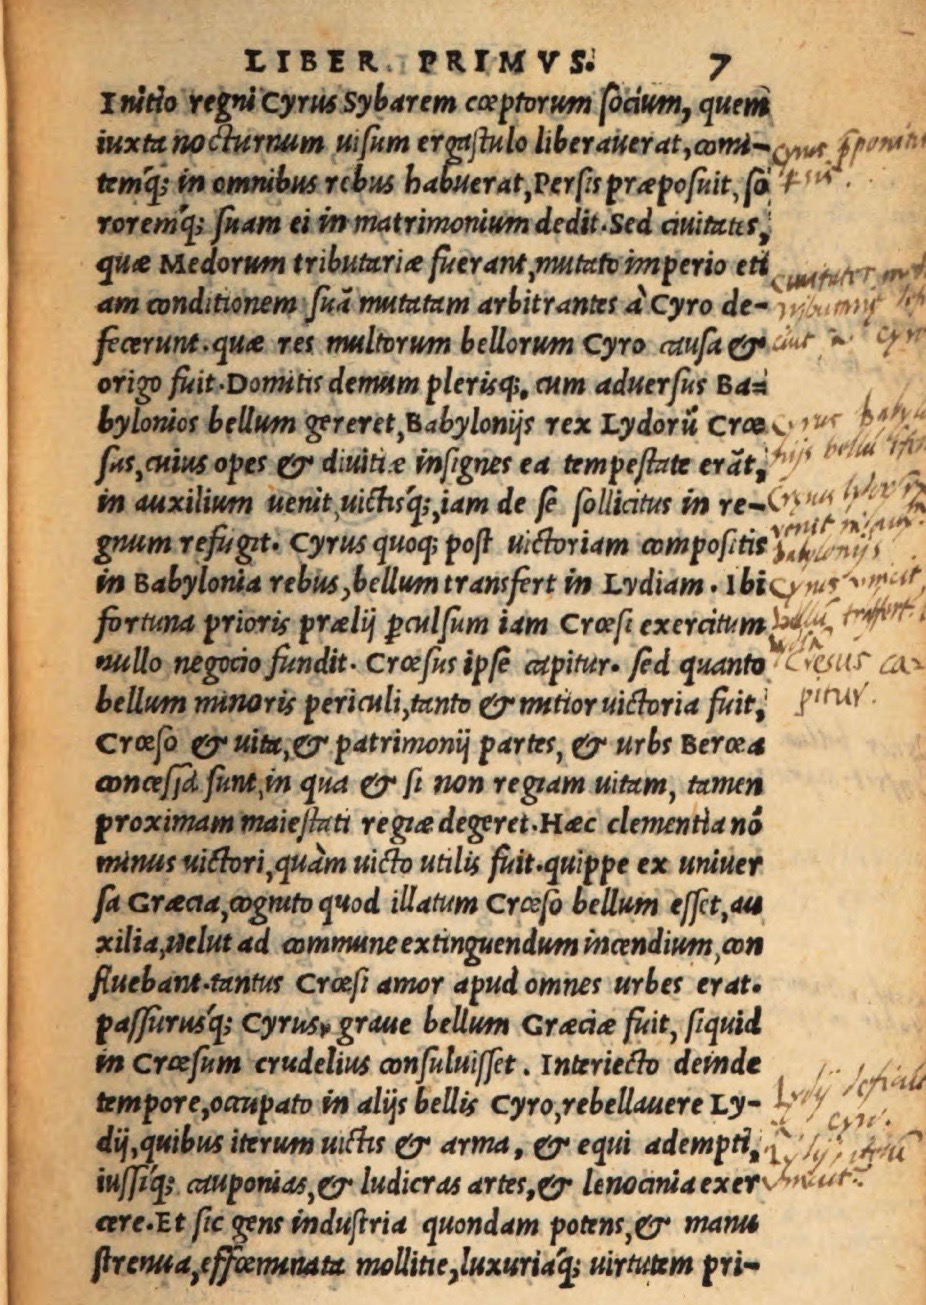 Printed book page in Latin with handwritten annotations along the right side.